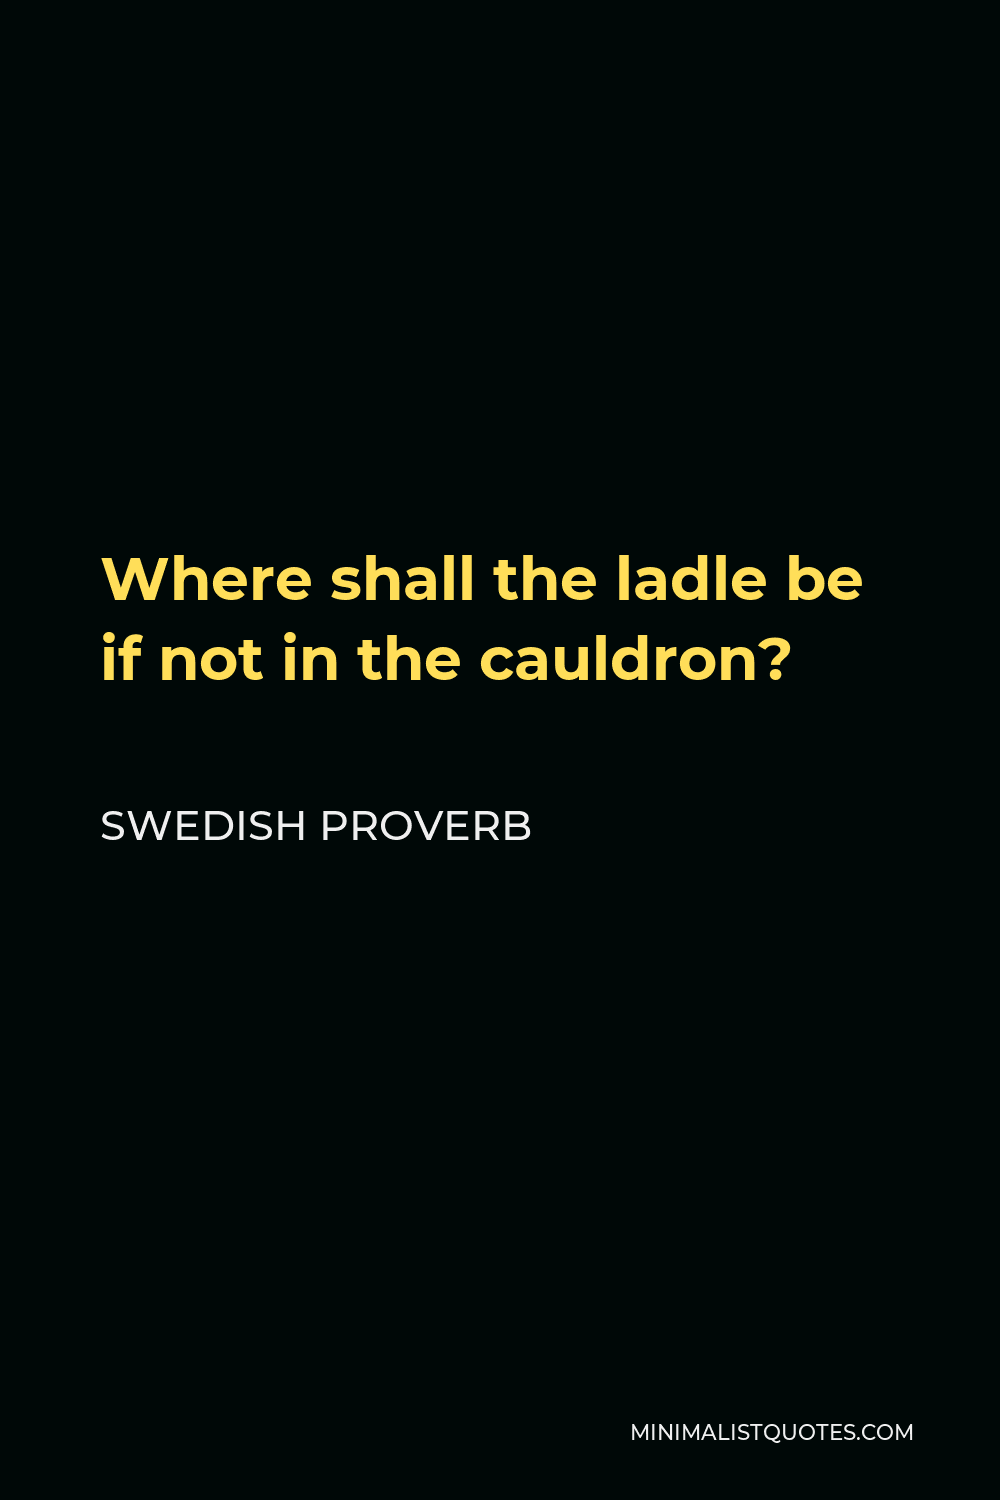 Swedish Proverb Quote - Where shall the ladle be if not in the cauldron?